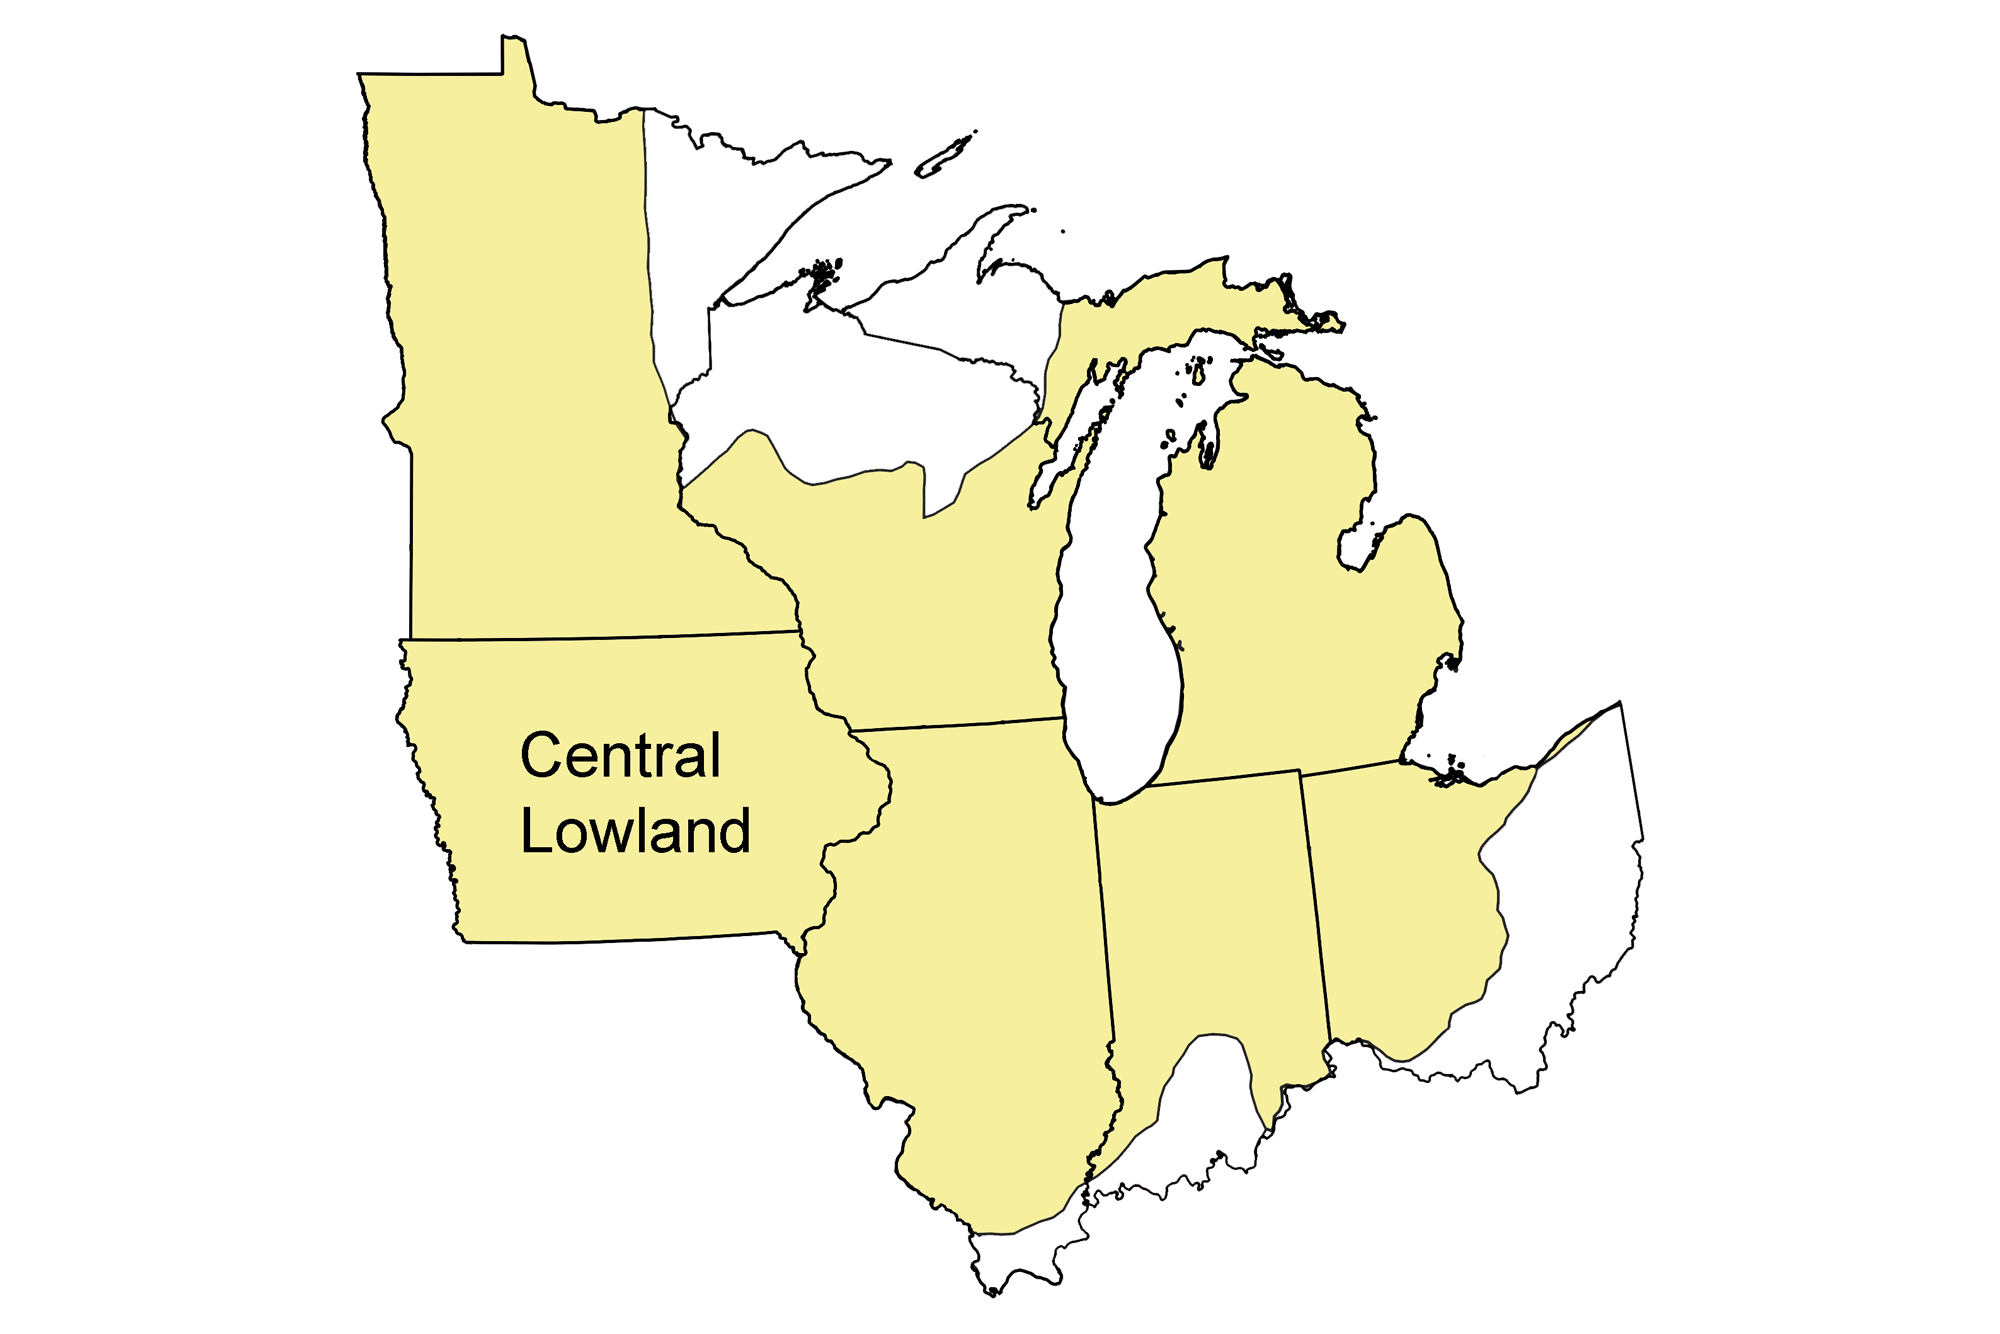 Simple map showing the Central Lowland region of the midwestern United States.